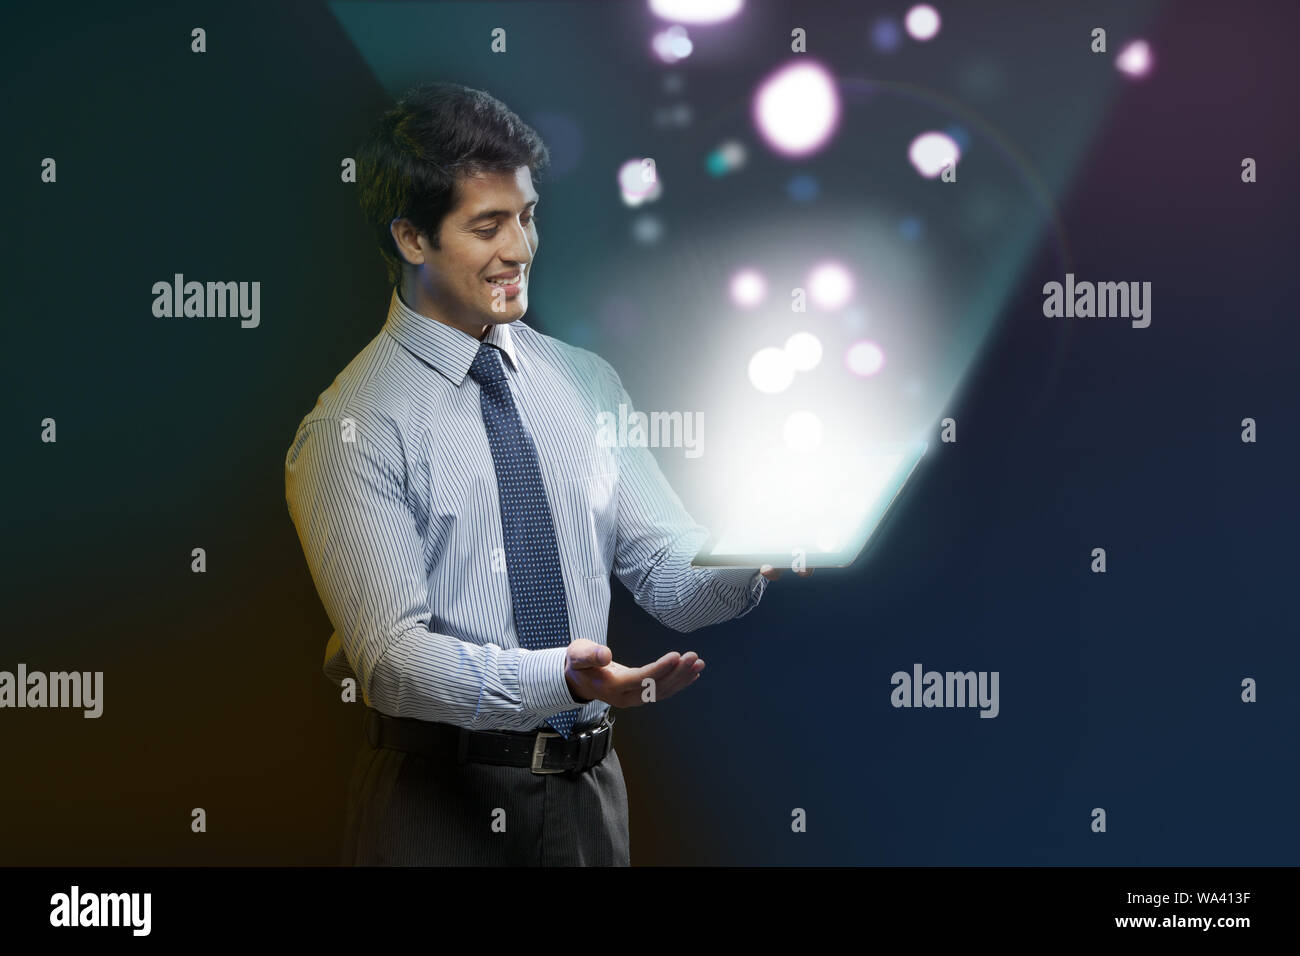 Businessman looking at lights coming from a digital tablet Stock Photo